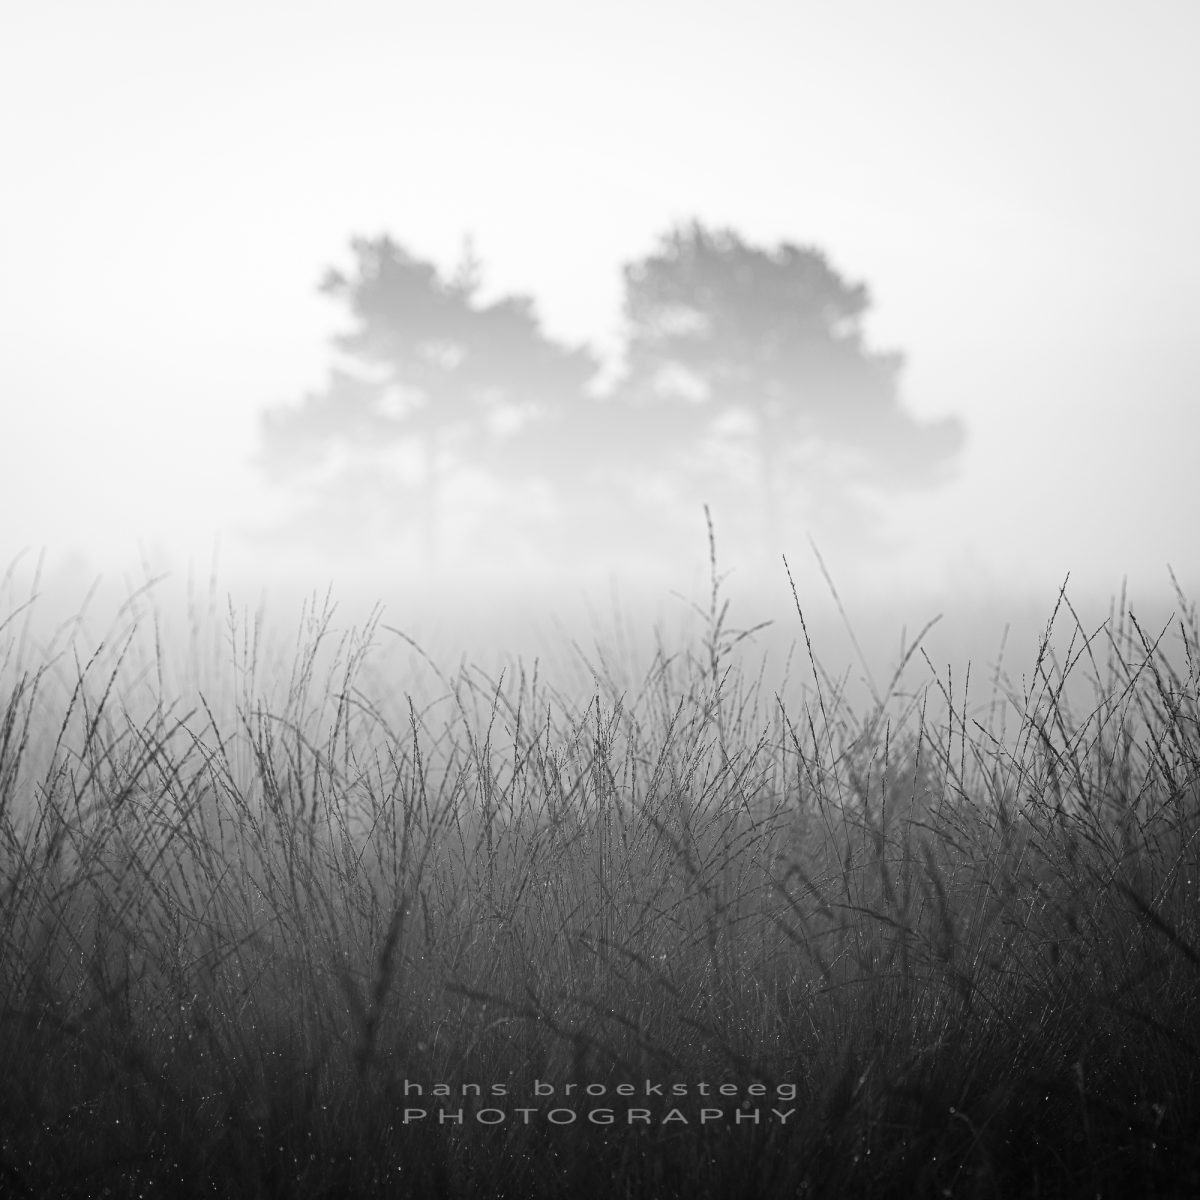 Mist and grass in black and white intimate landscape